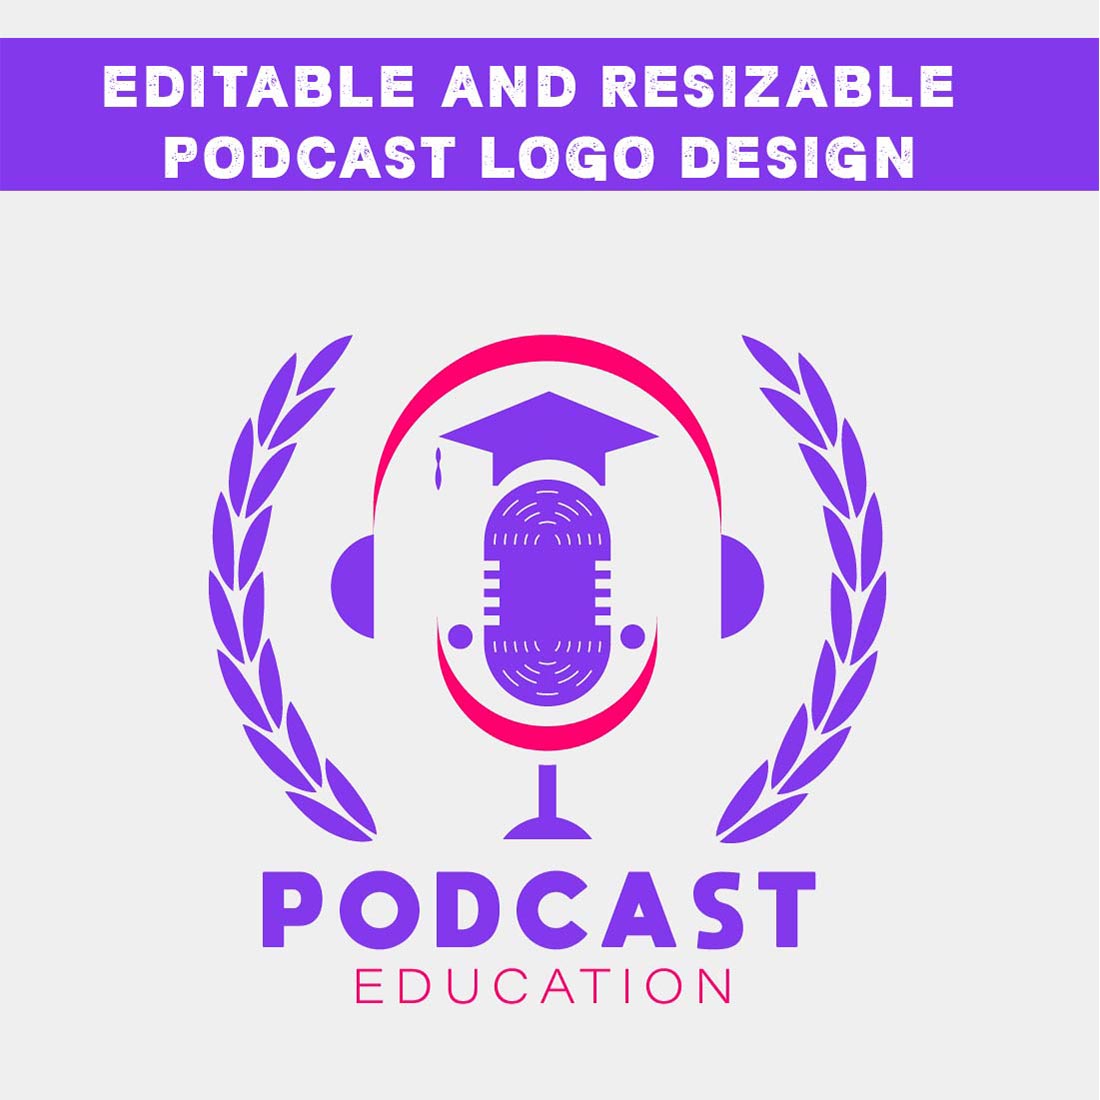 Editable and Resizable Podcast Logo Design cover image.